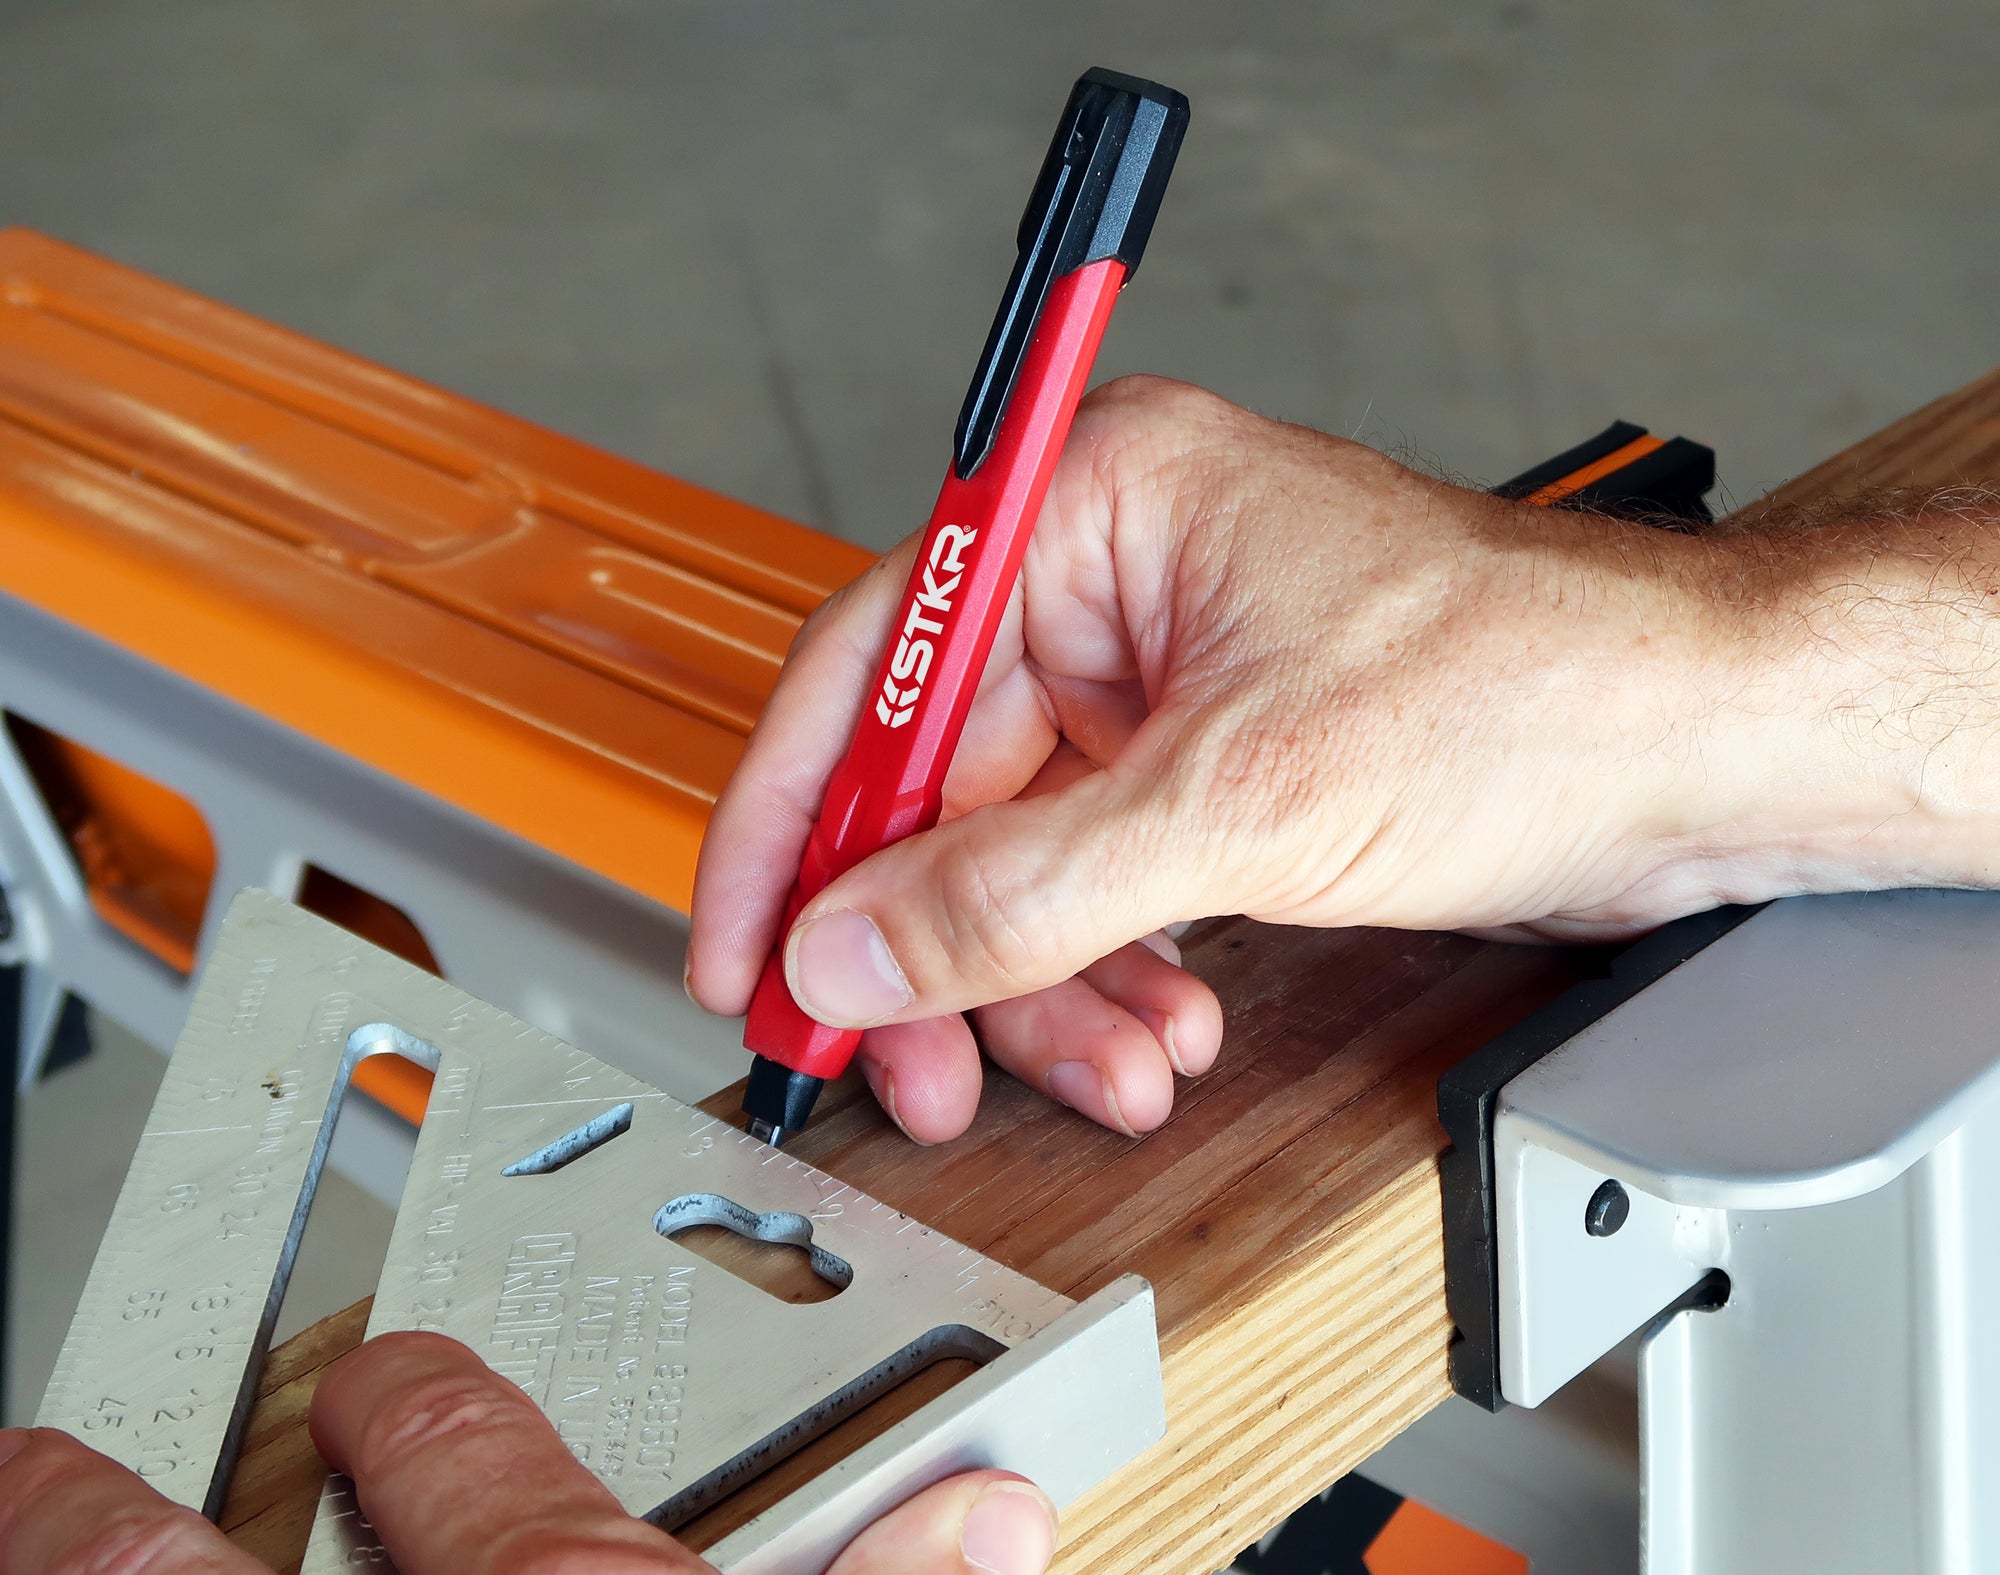 Are Mechanical Pencils Good for Woodworking? What Pencil Is Best